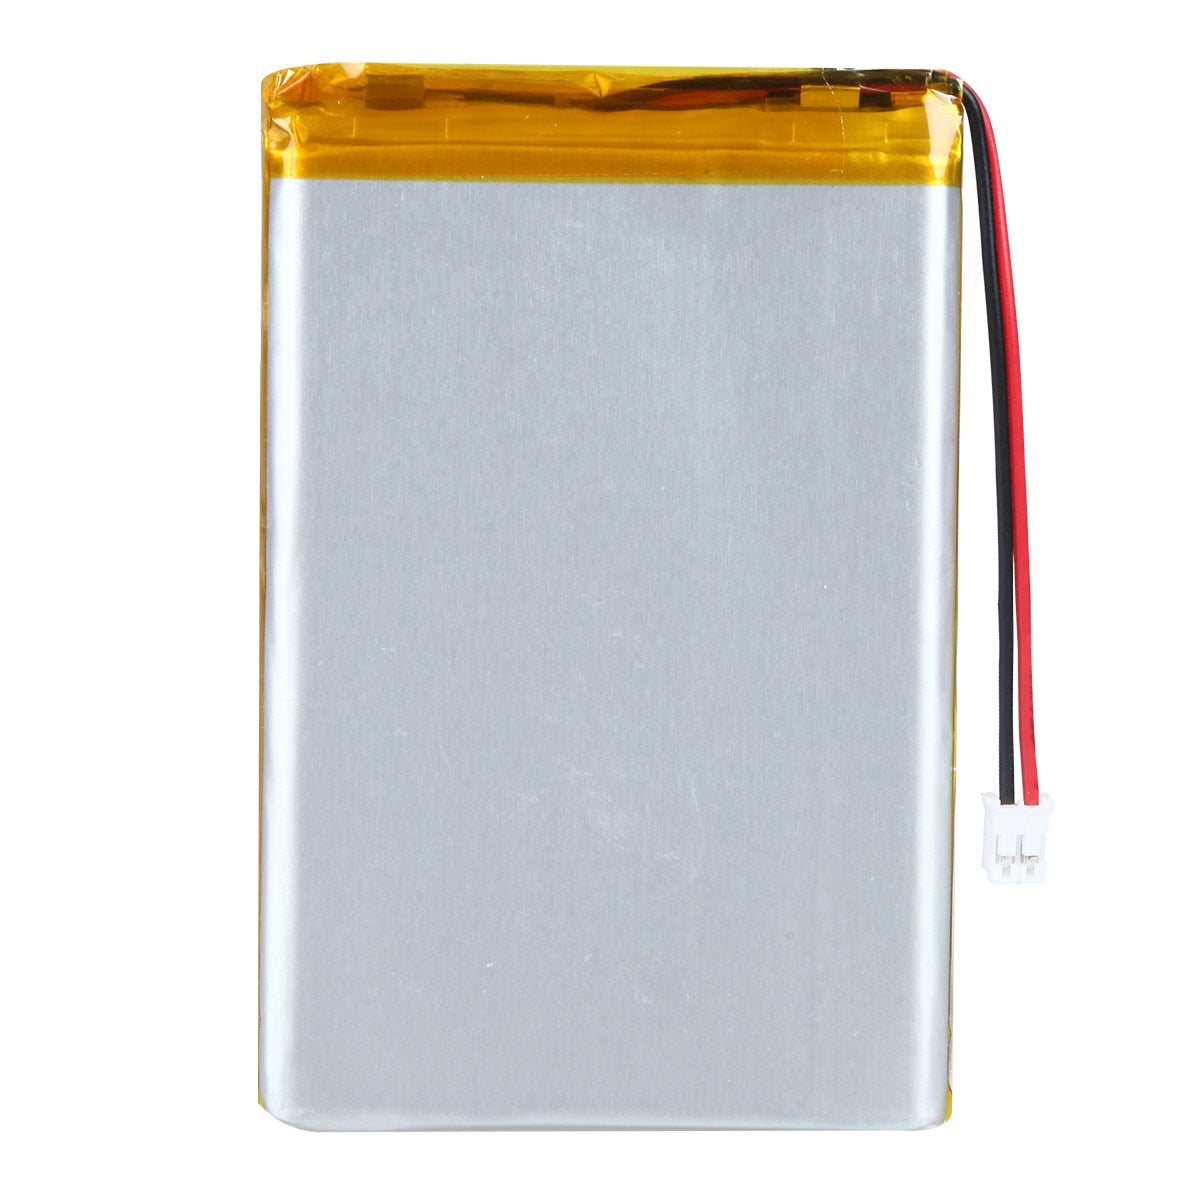 YDL 3.7V 5000mAh 706090 Rechargeable Lithium Polymer Battery Length 92mm